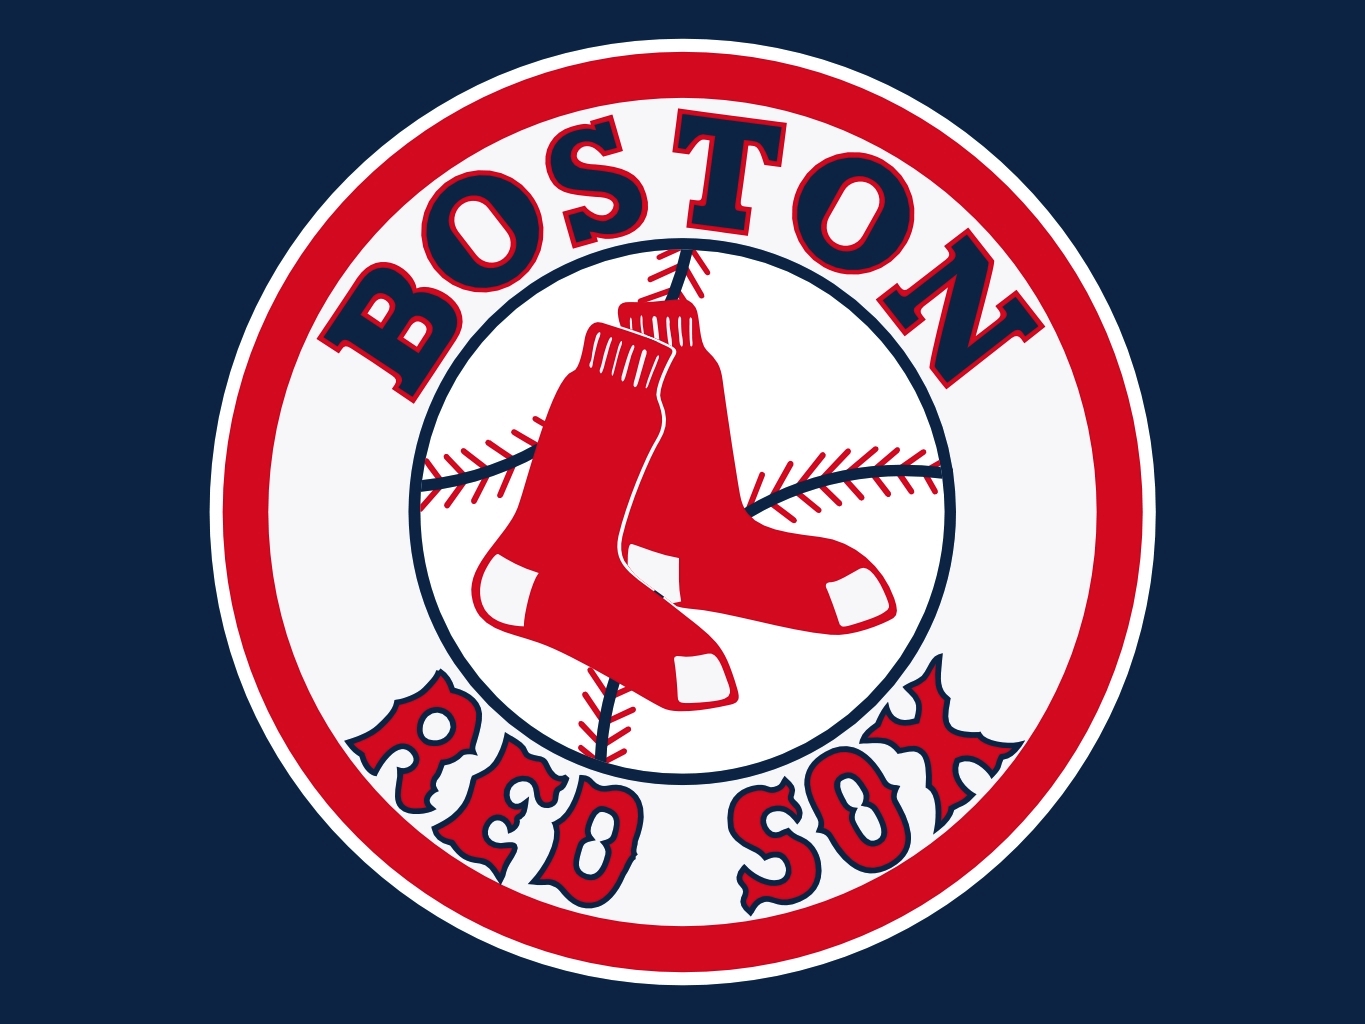 Boston Red-Sox Sign A023 - TinWorld Sports Signs